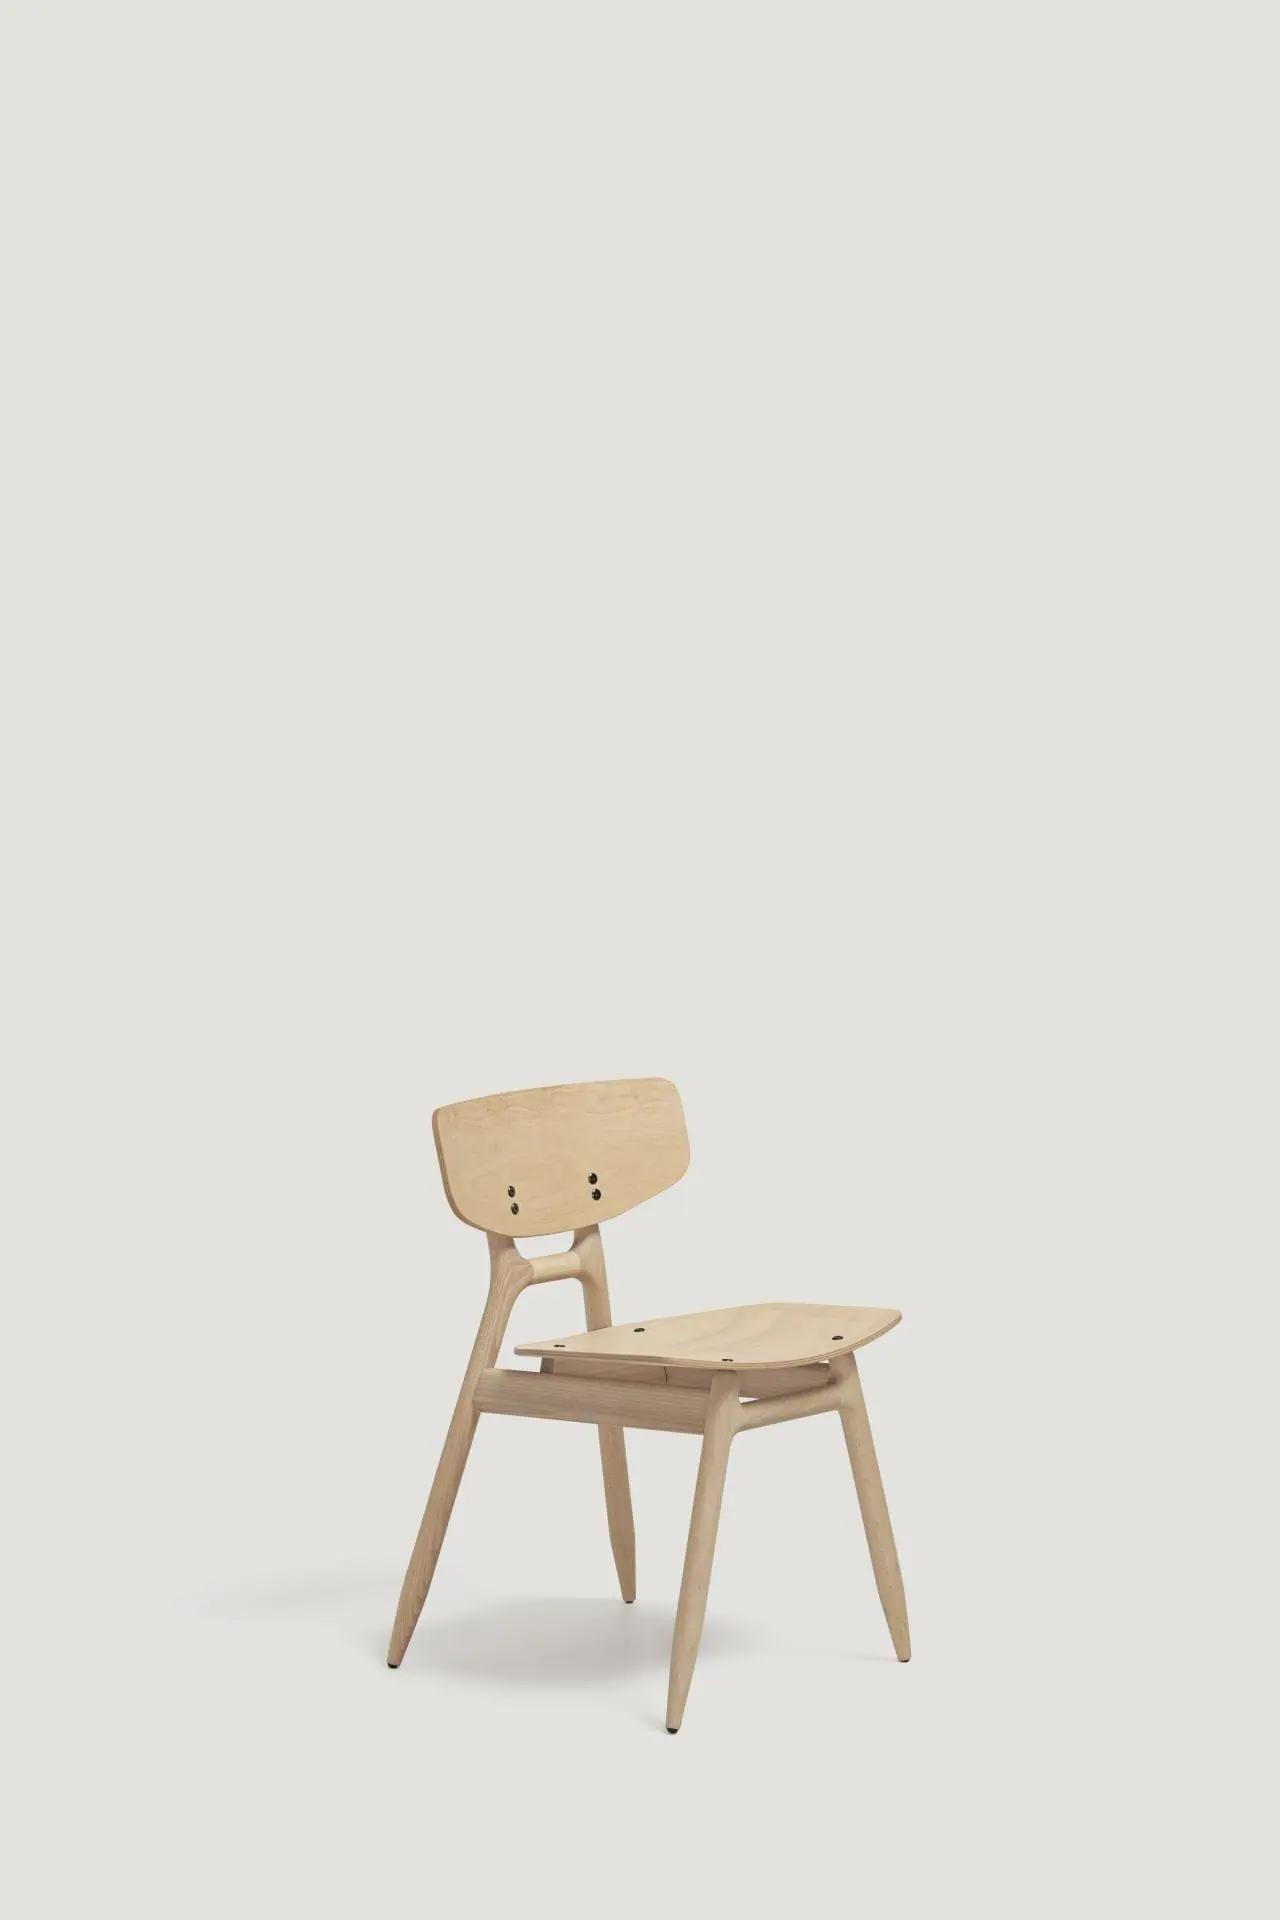 capdell-eco-chair-02